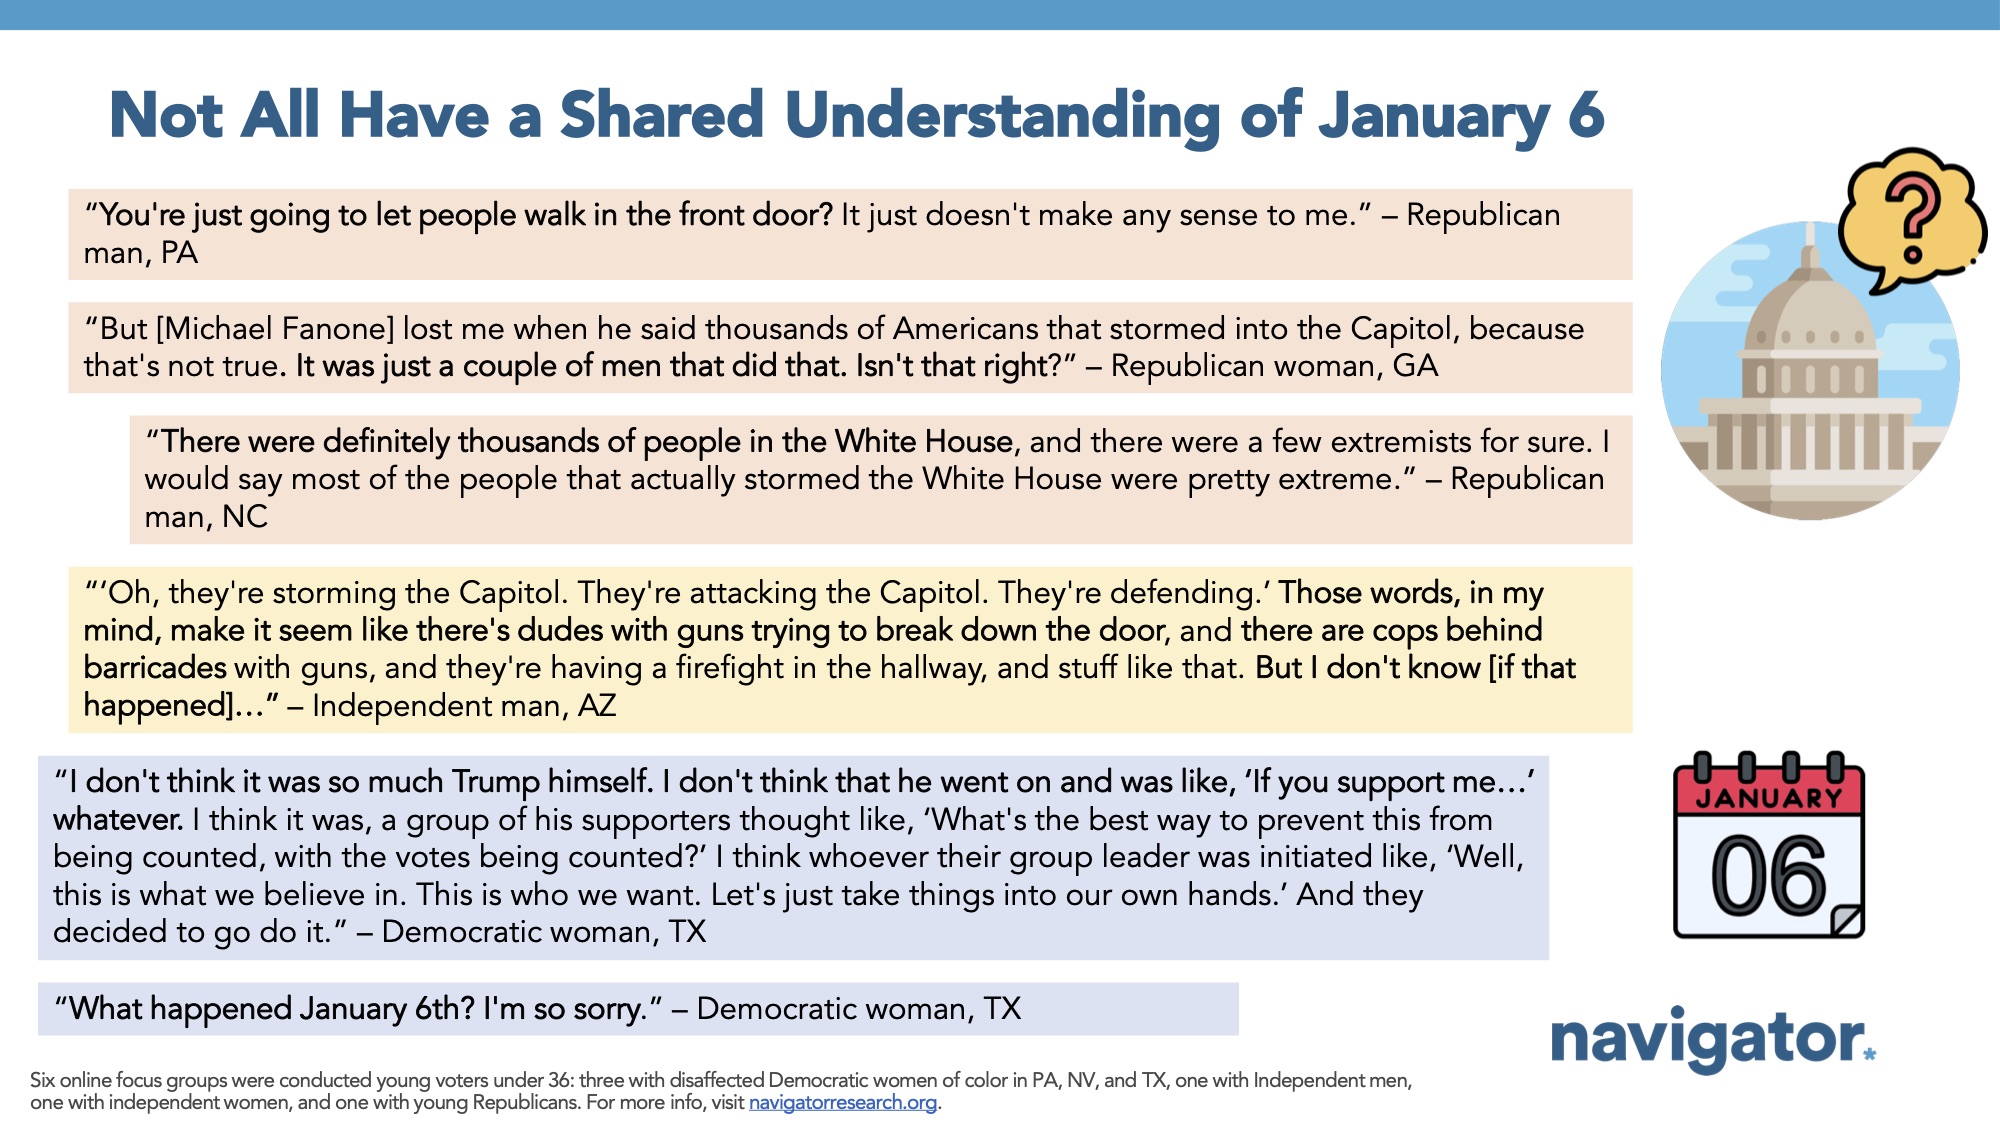 Focus group report slide titled: Not All Have a Shared Understanding of January 6